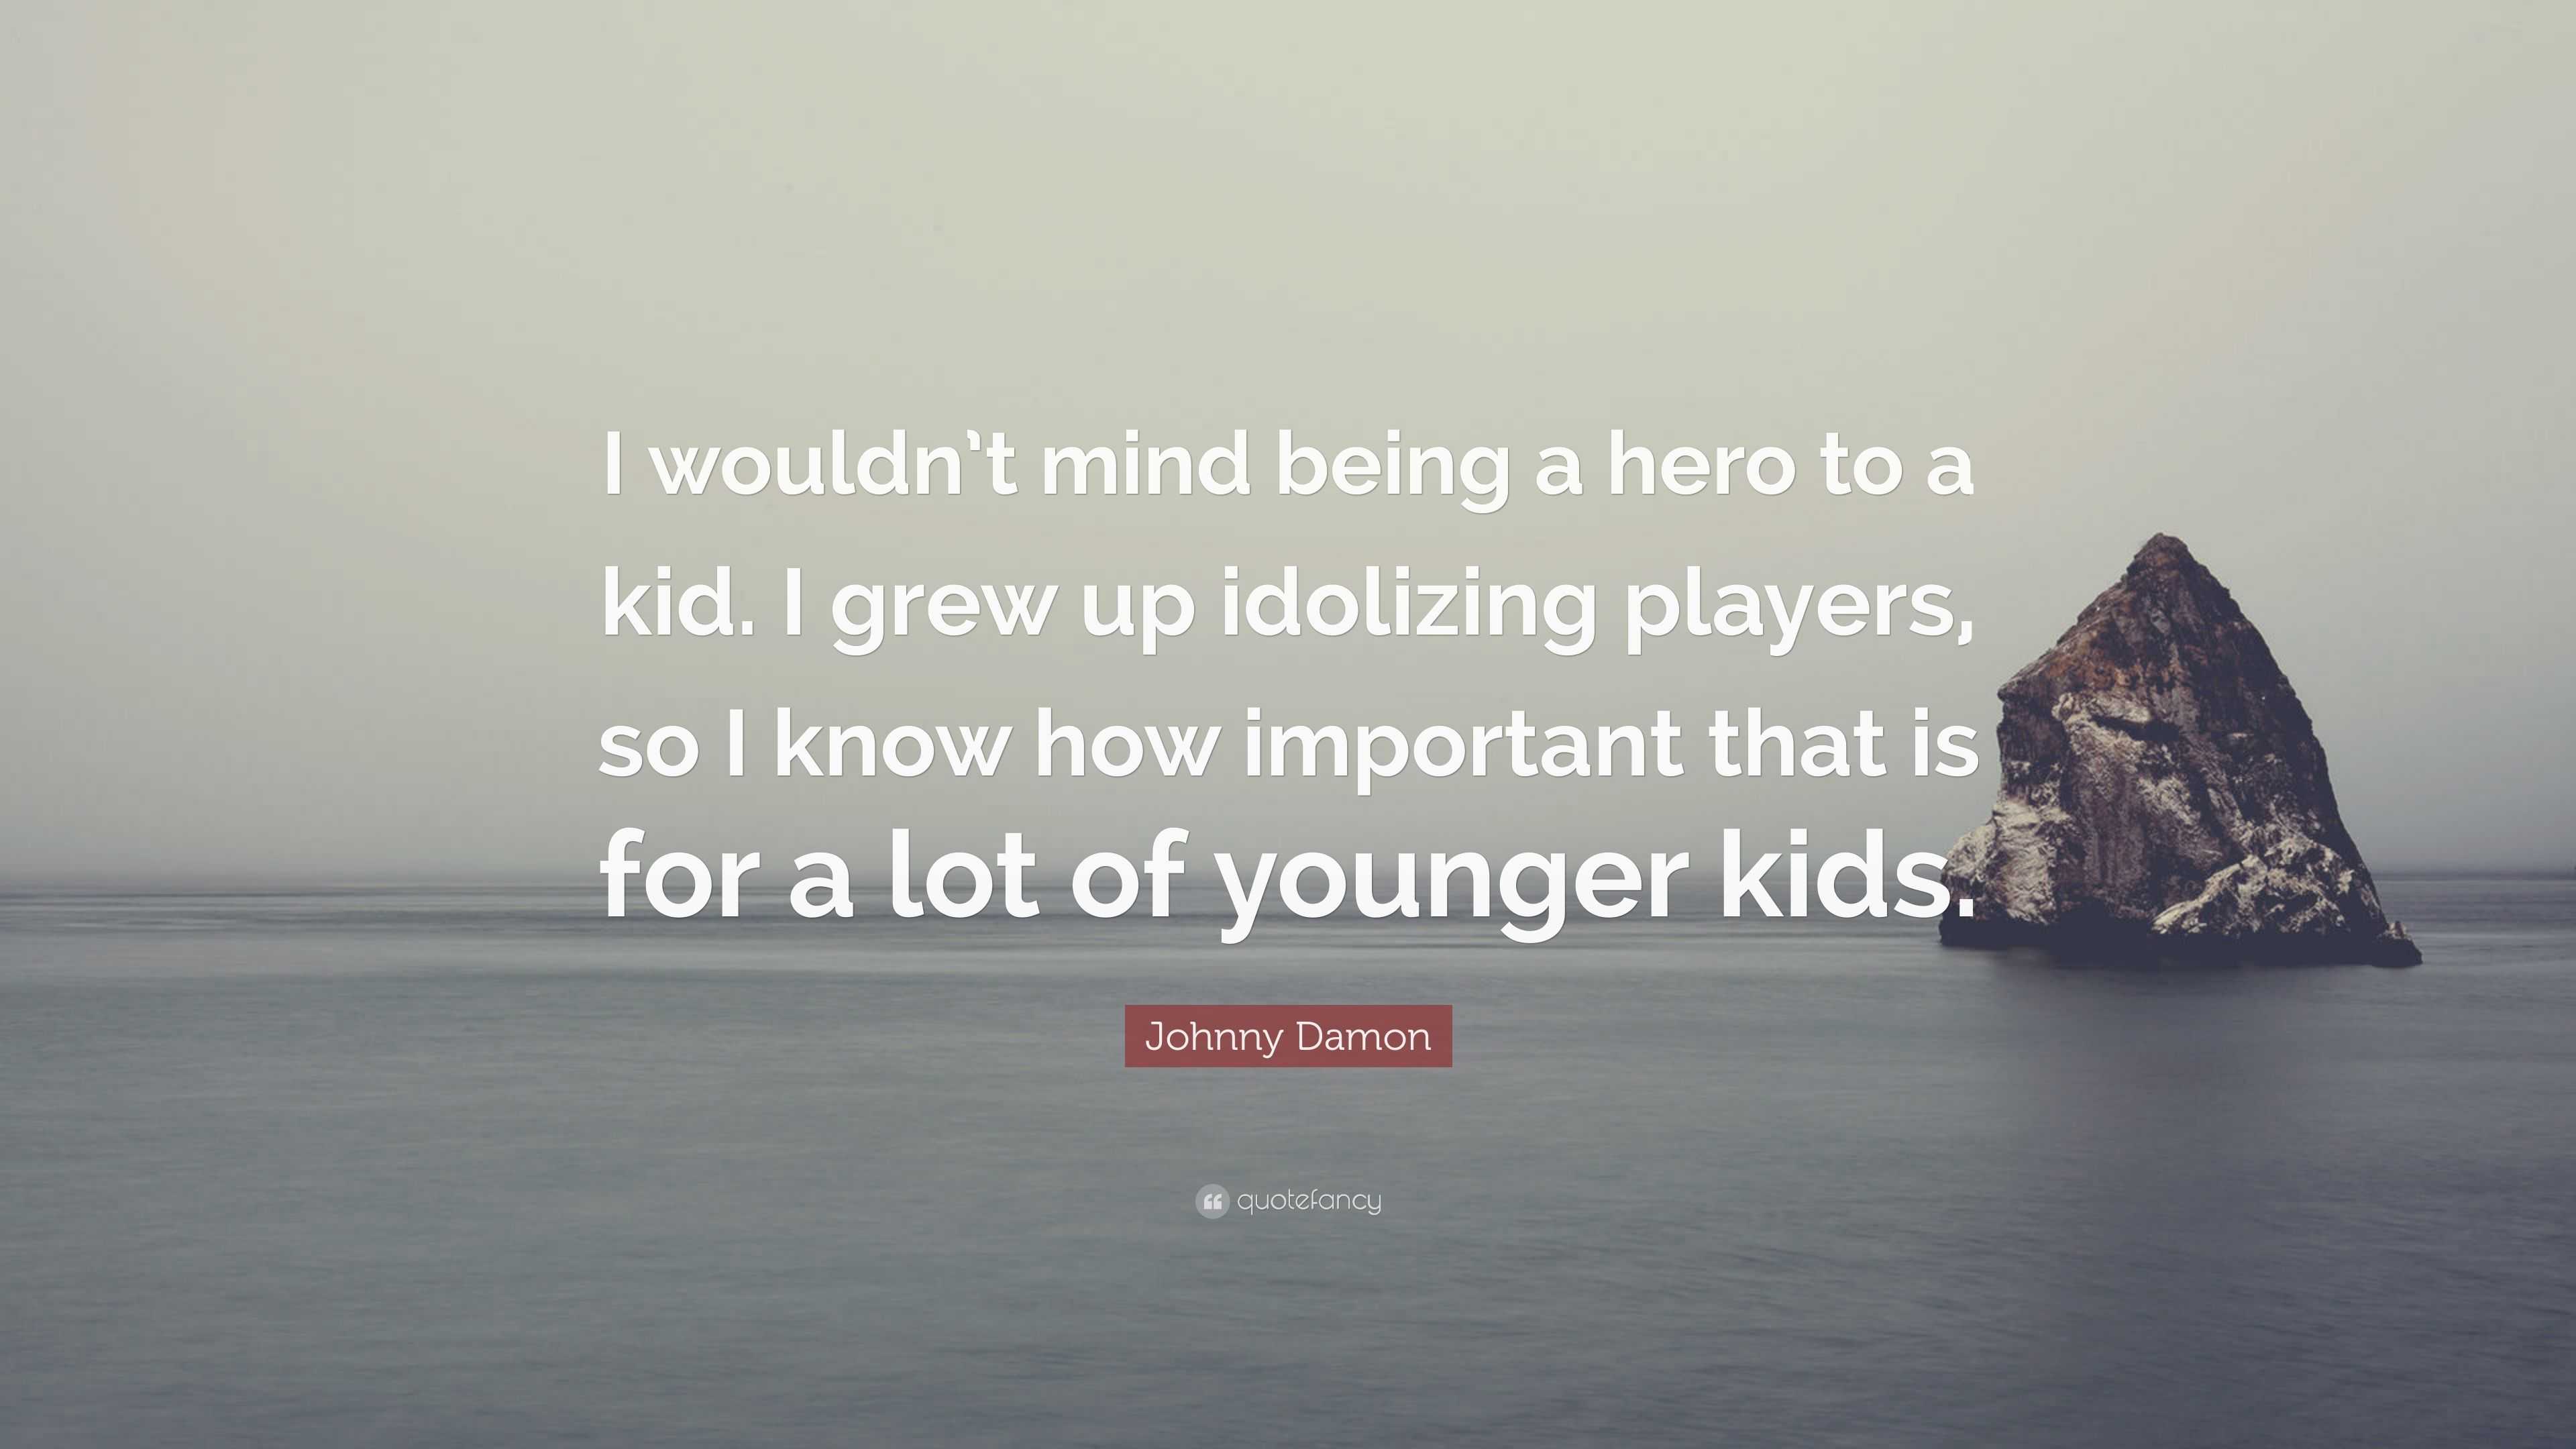 Johnny Damon Quote: “I wouldn't mind being a hero to a kid. I grew